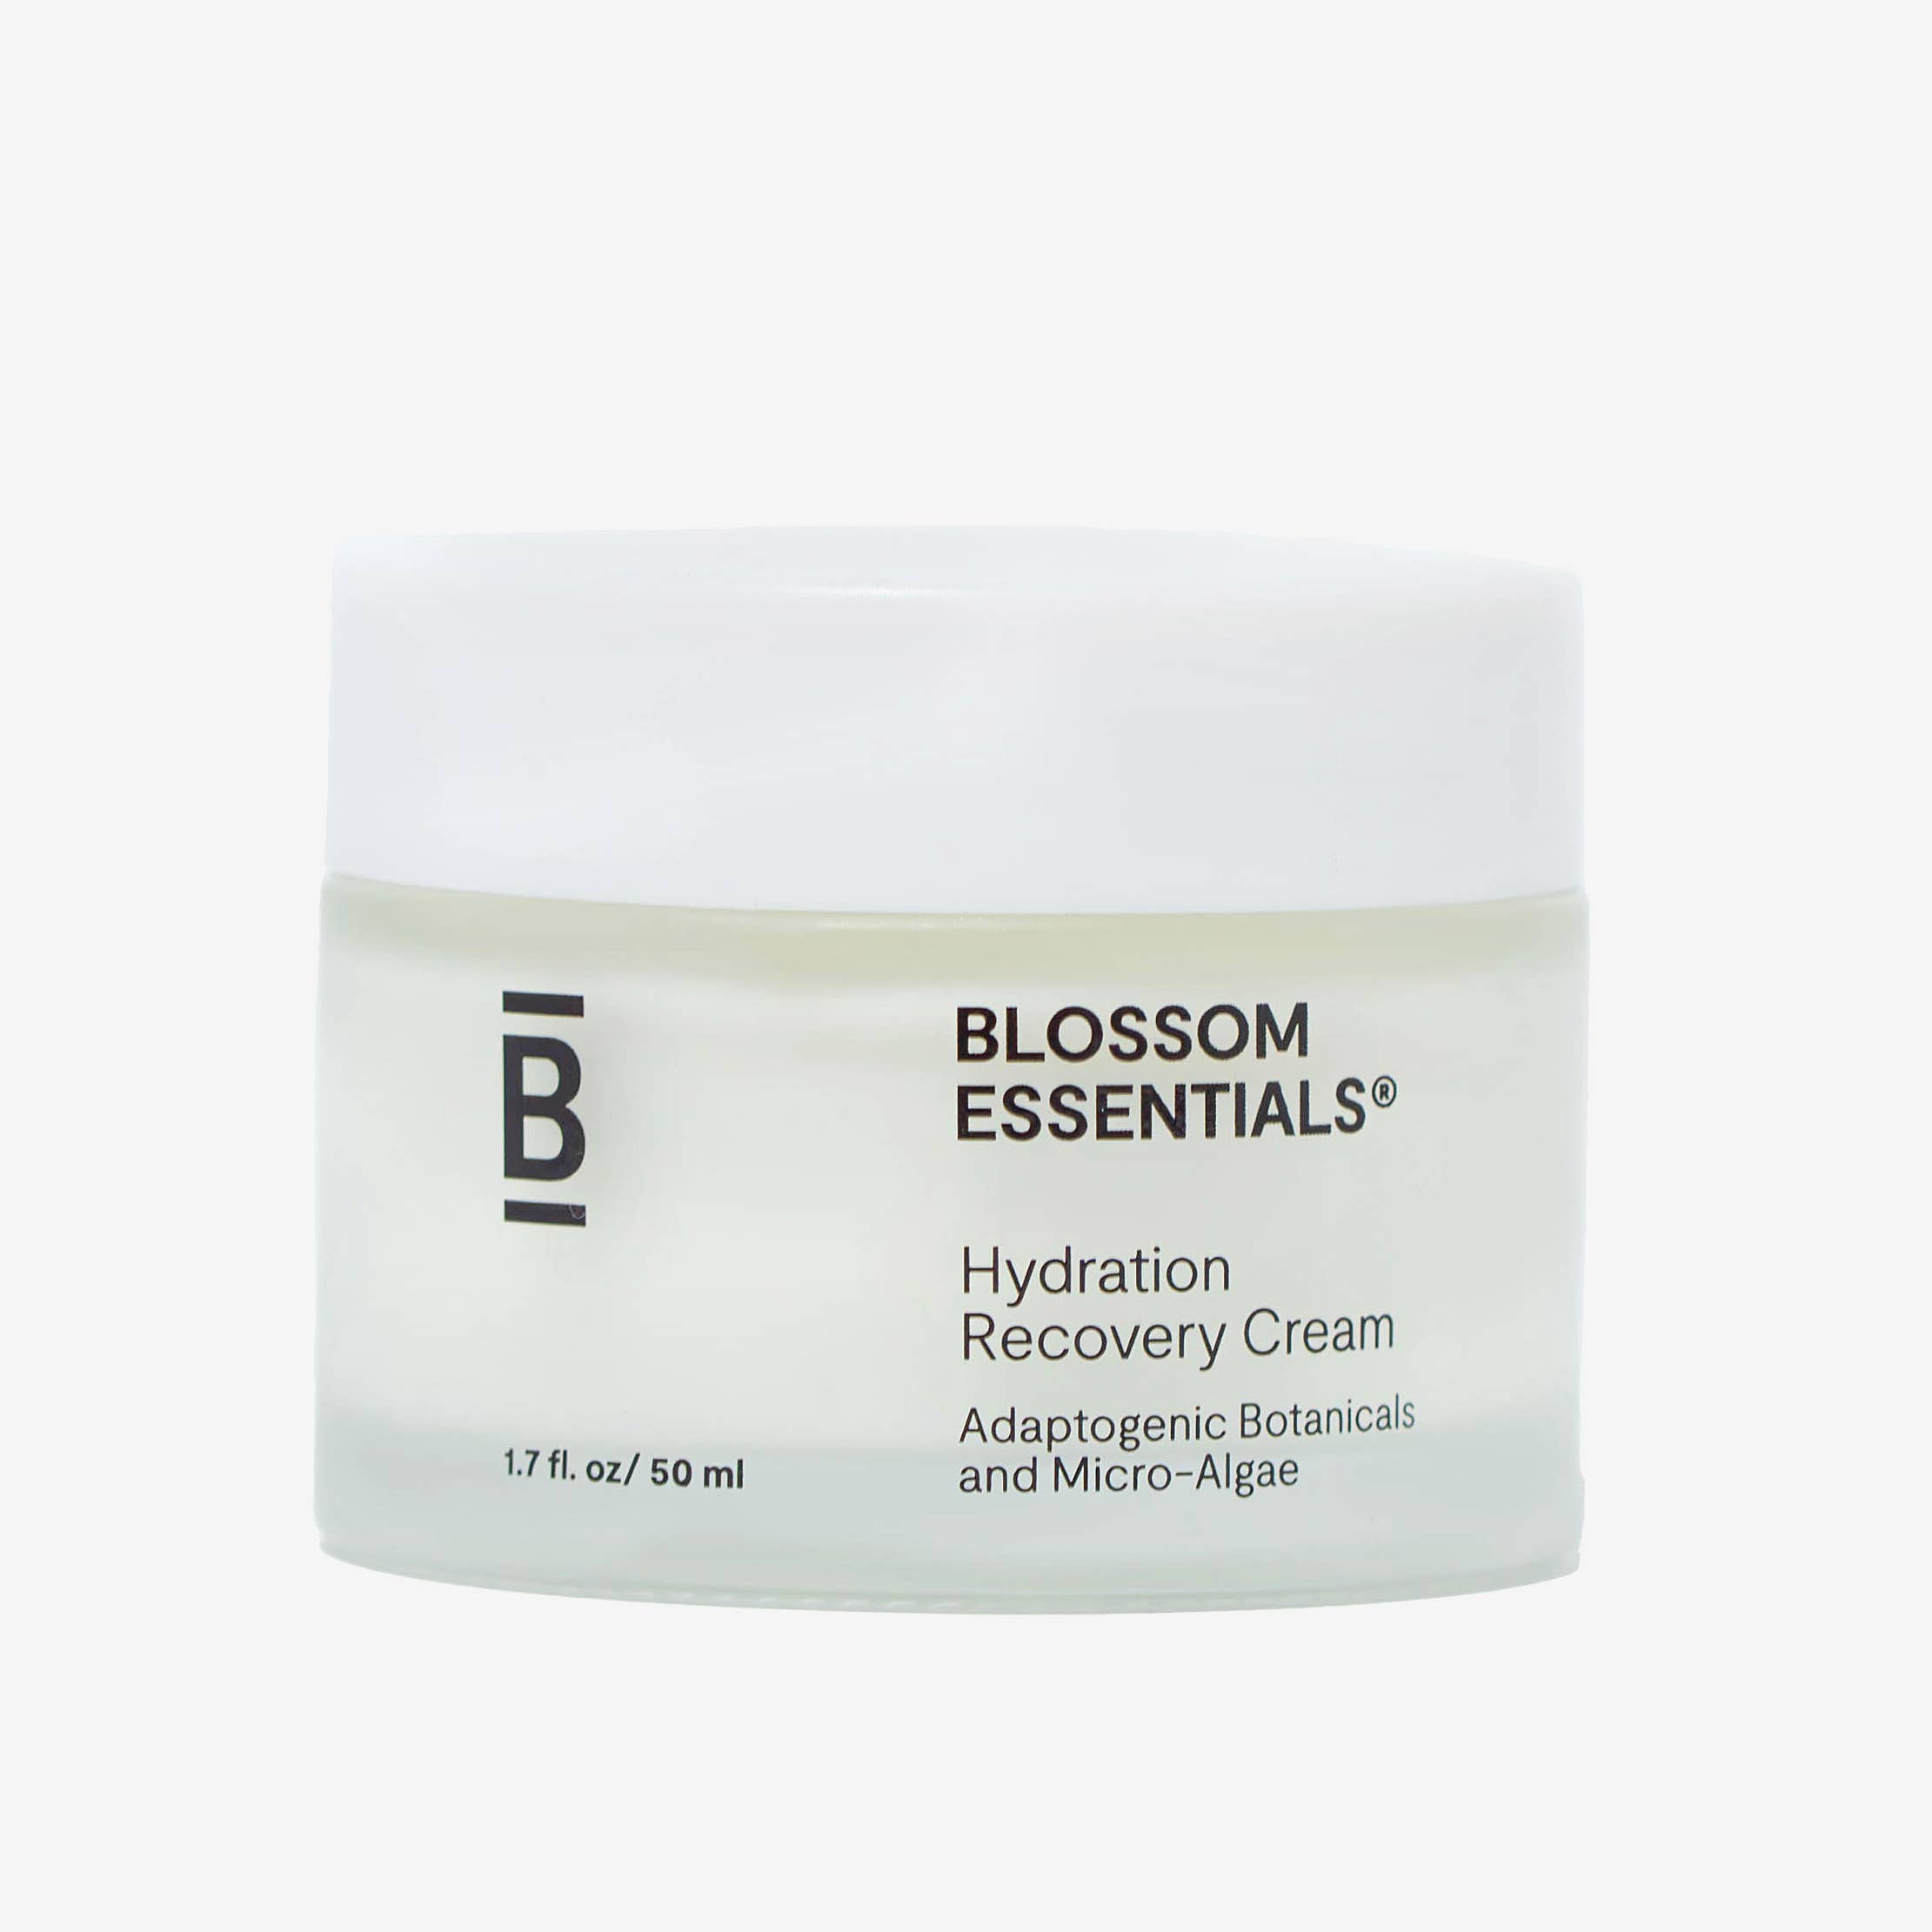 ALL BLOSSOM PRODUCTS – Blossom Essentials